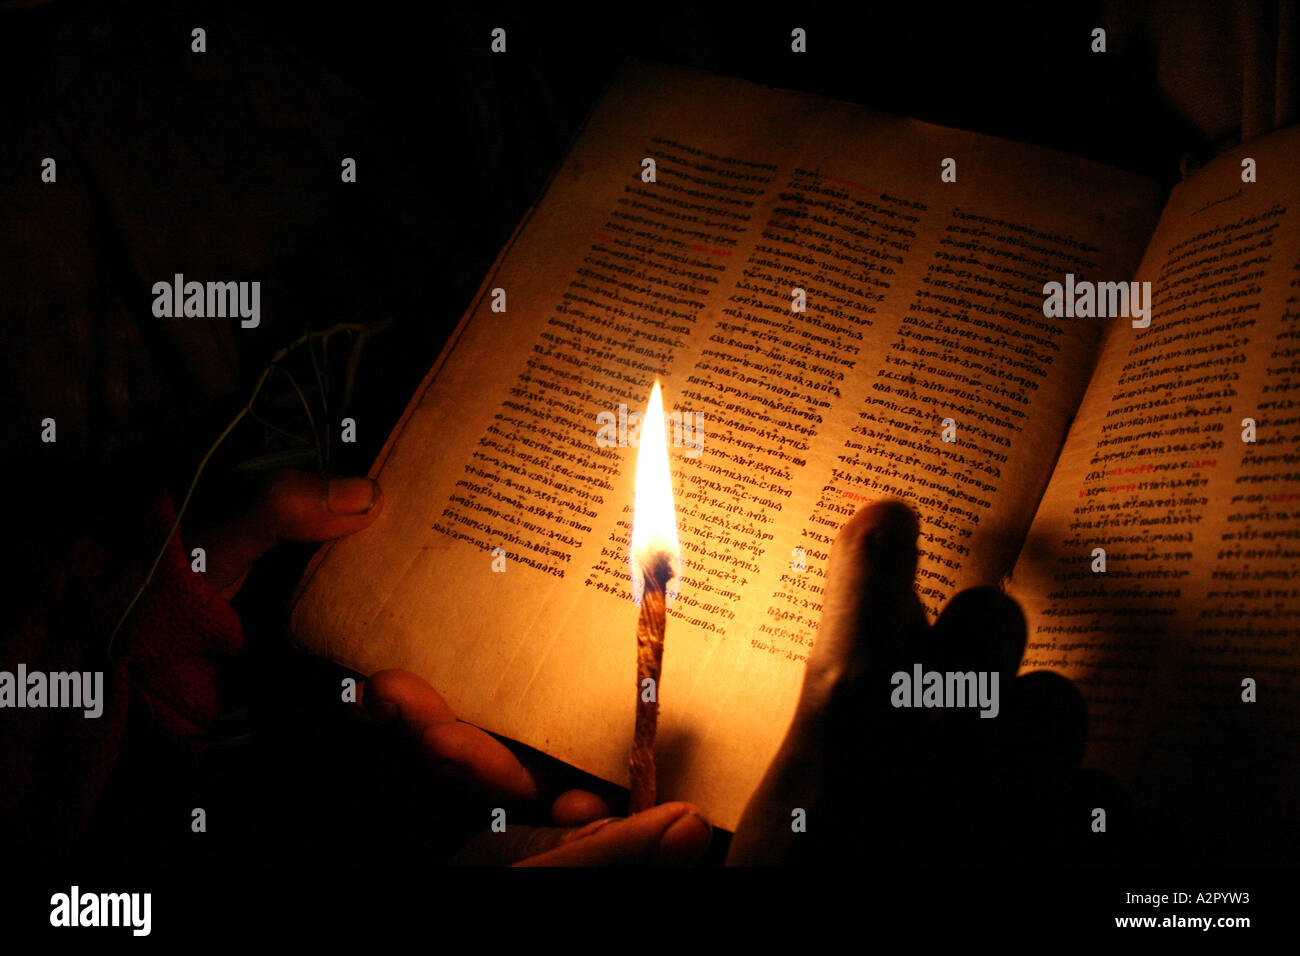 Reading from an ancient lambskin religious text inside one of Lalibels's churches, Lalibela, Ethiopia Stock Photo